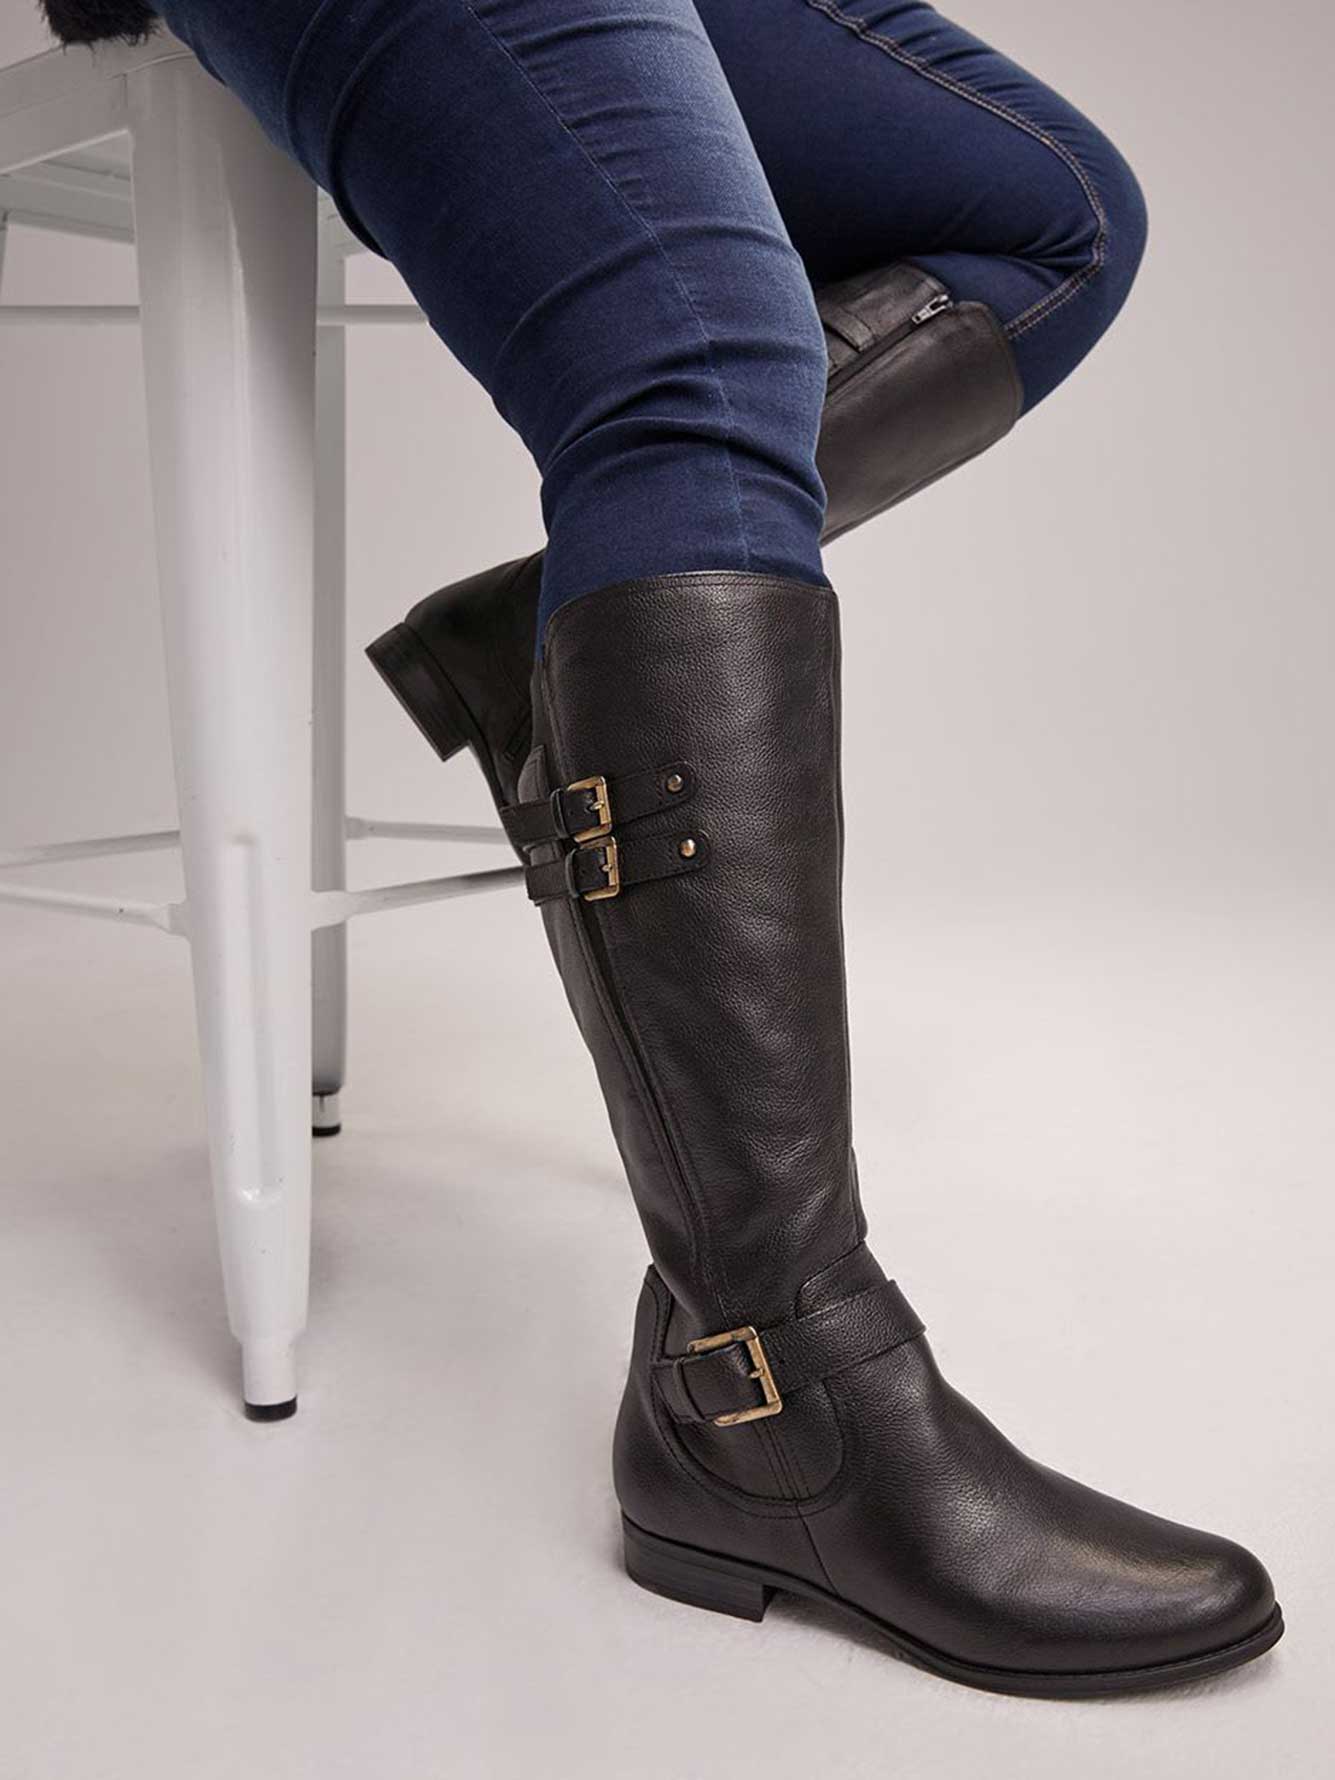 naturalizer boots on sale